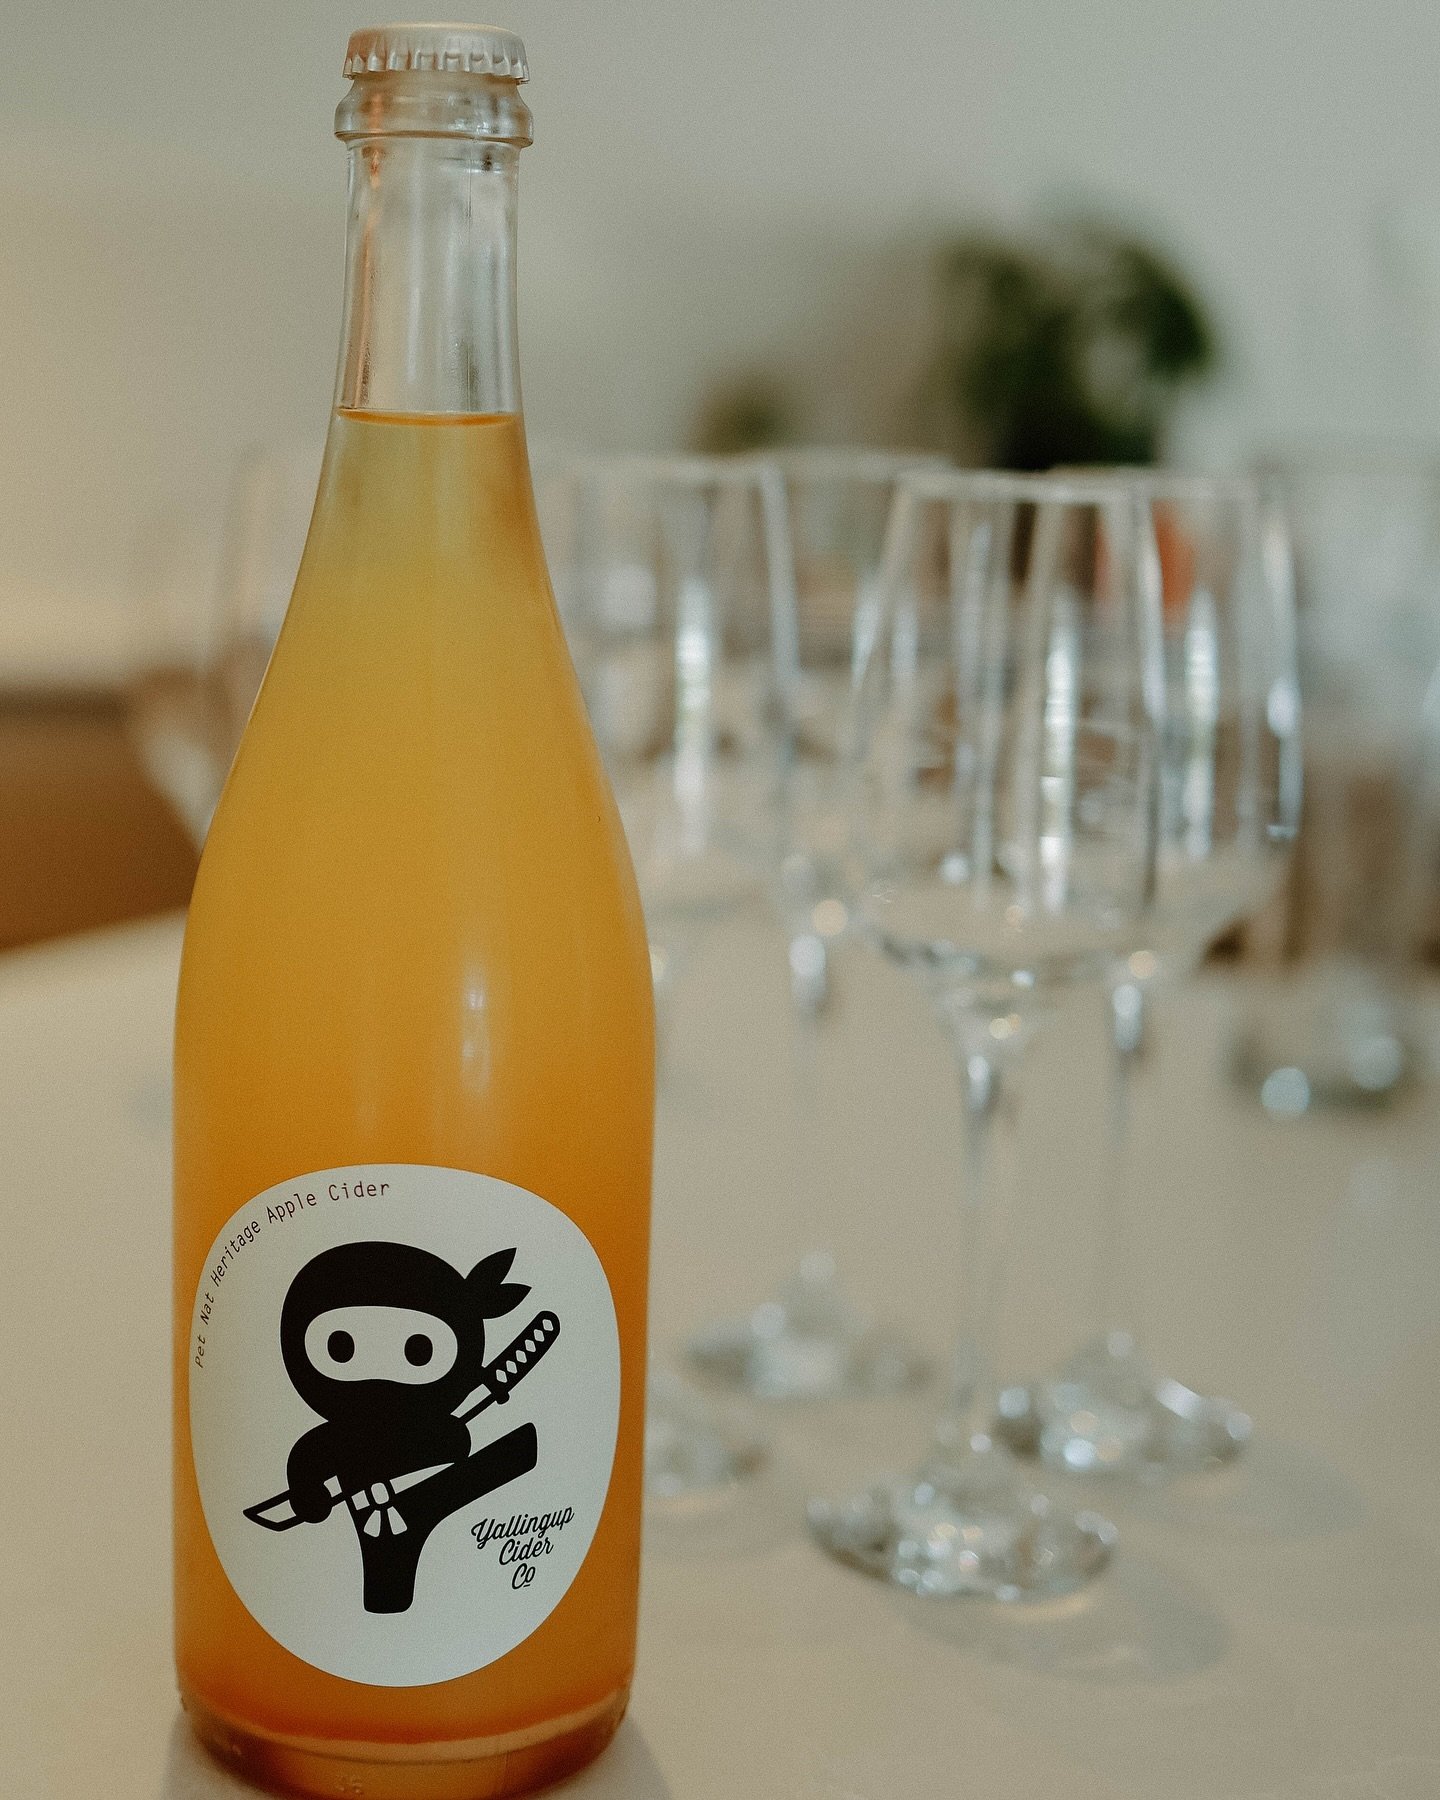 Yallingup Cider Co&rsquo;s Heritage Apple Cider, naturally fermented, best enjoyed with this Easter weekend;

Live music 🎶 

Tasty Bites by @chowstable 🥟

Award winning organic wines @houseofcardswine 🍷 

Sunshine and family friendly grassed area 